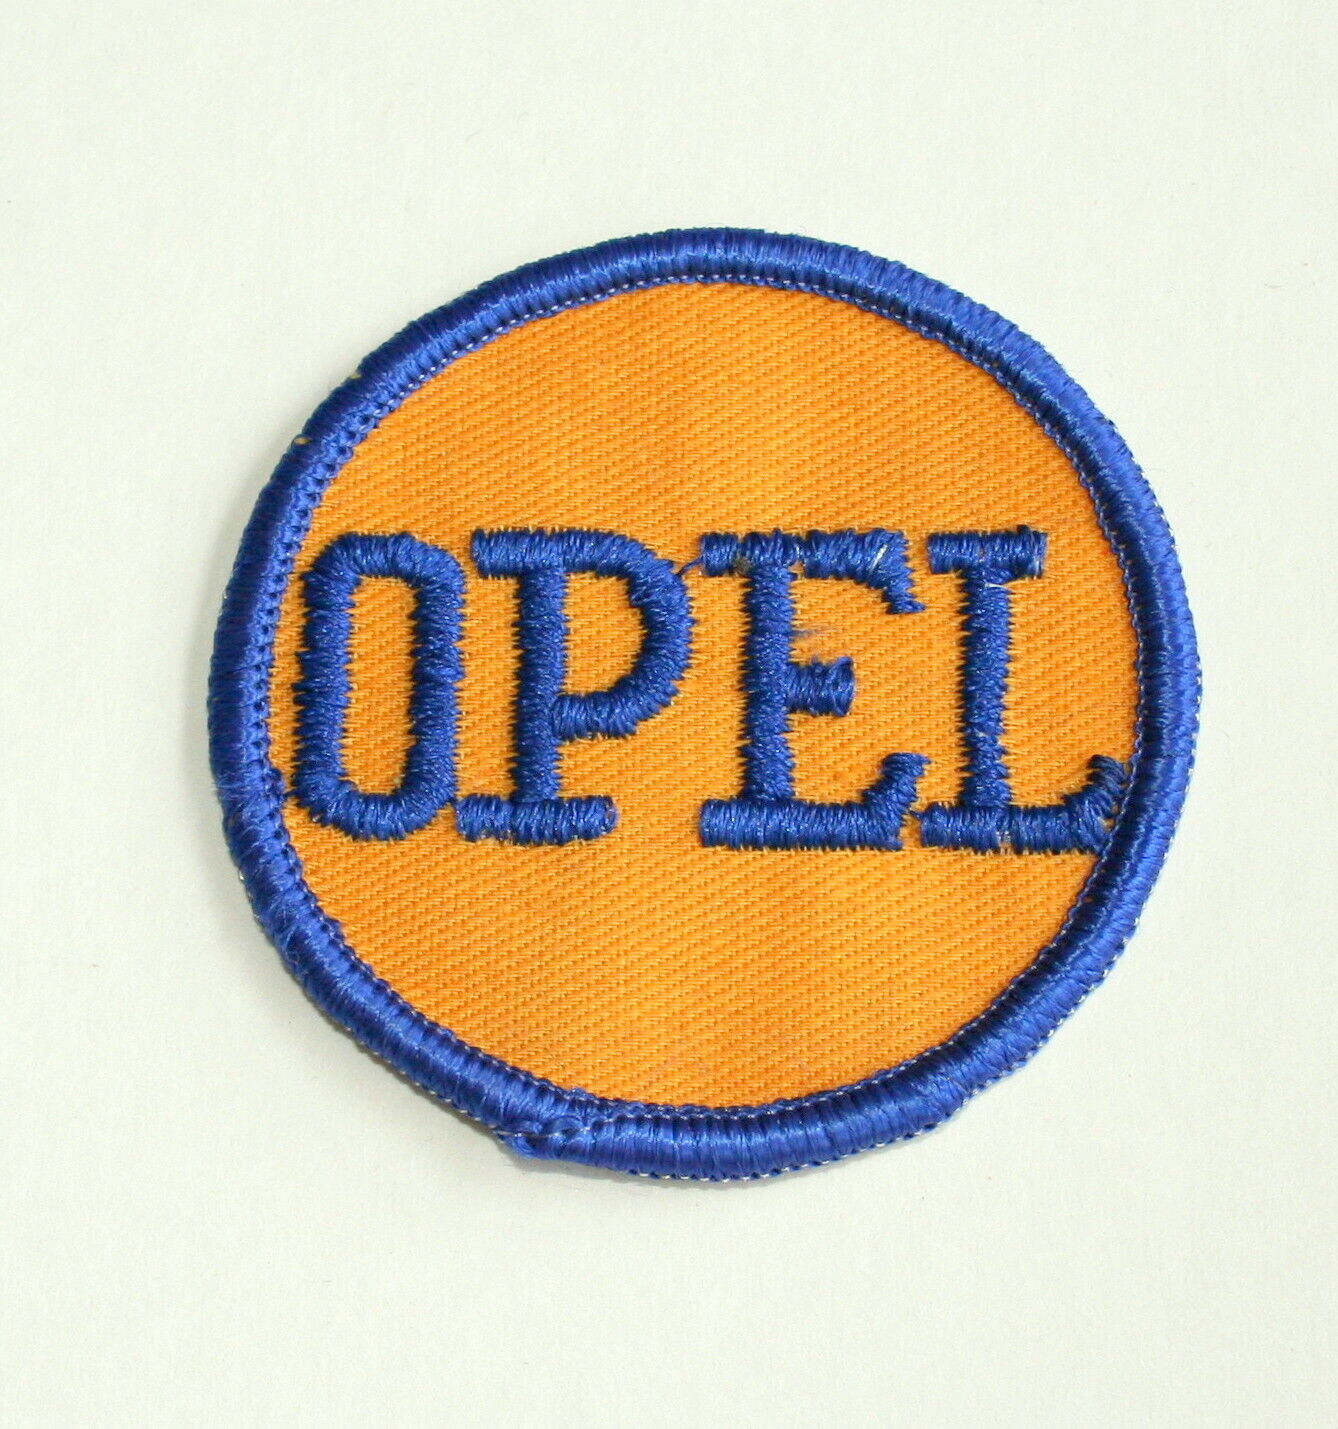 Vintage Opel Automotive Car Round Cloth Jacket Hat Patch New NOS 1960s Opel